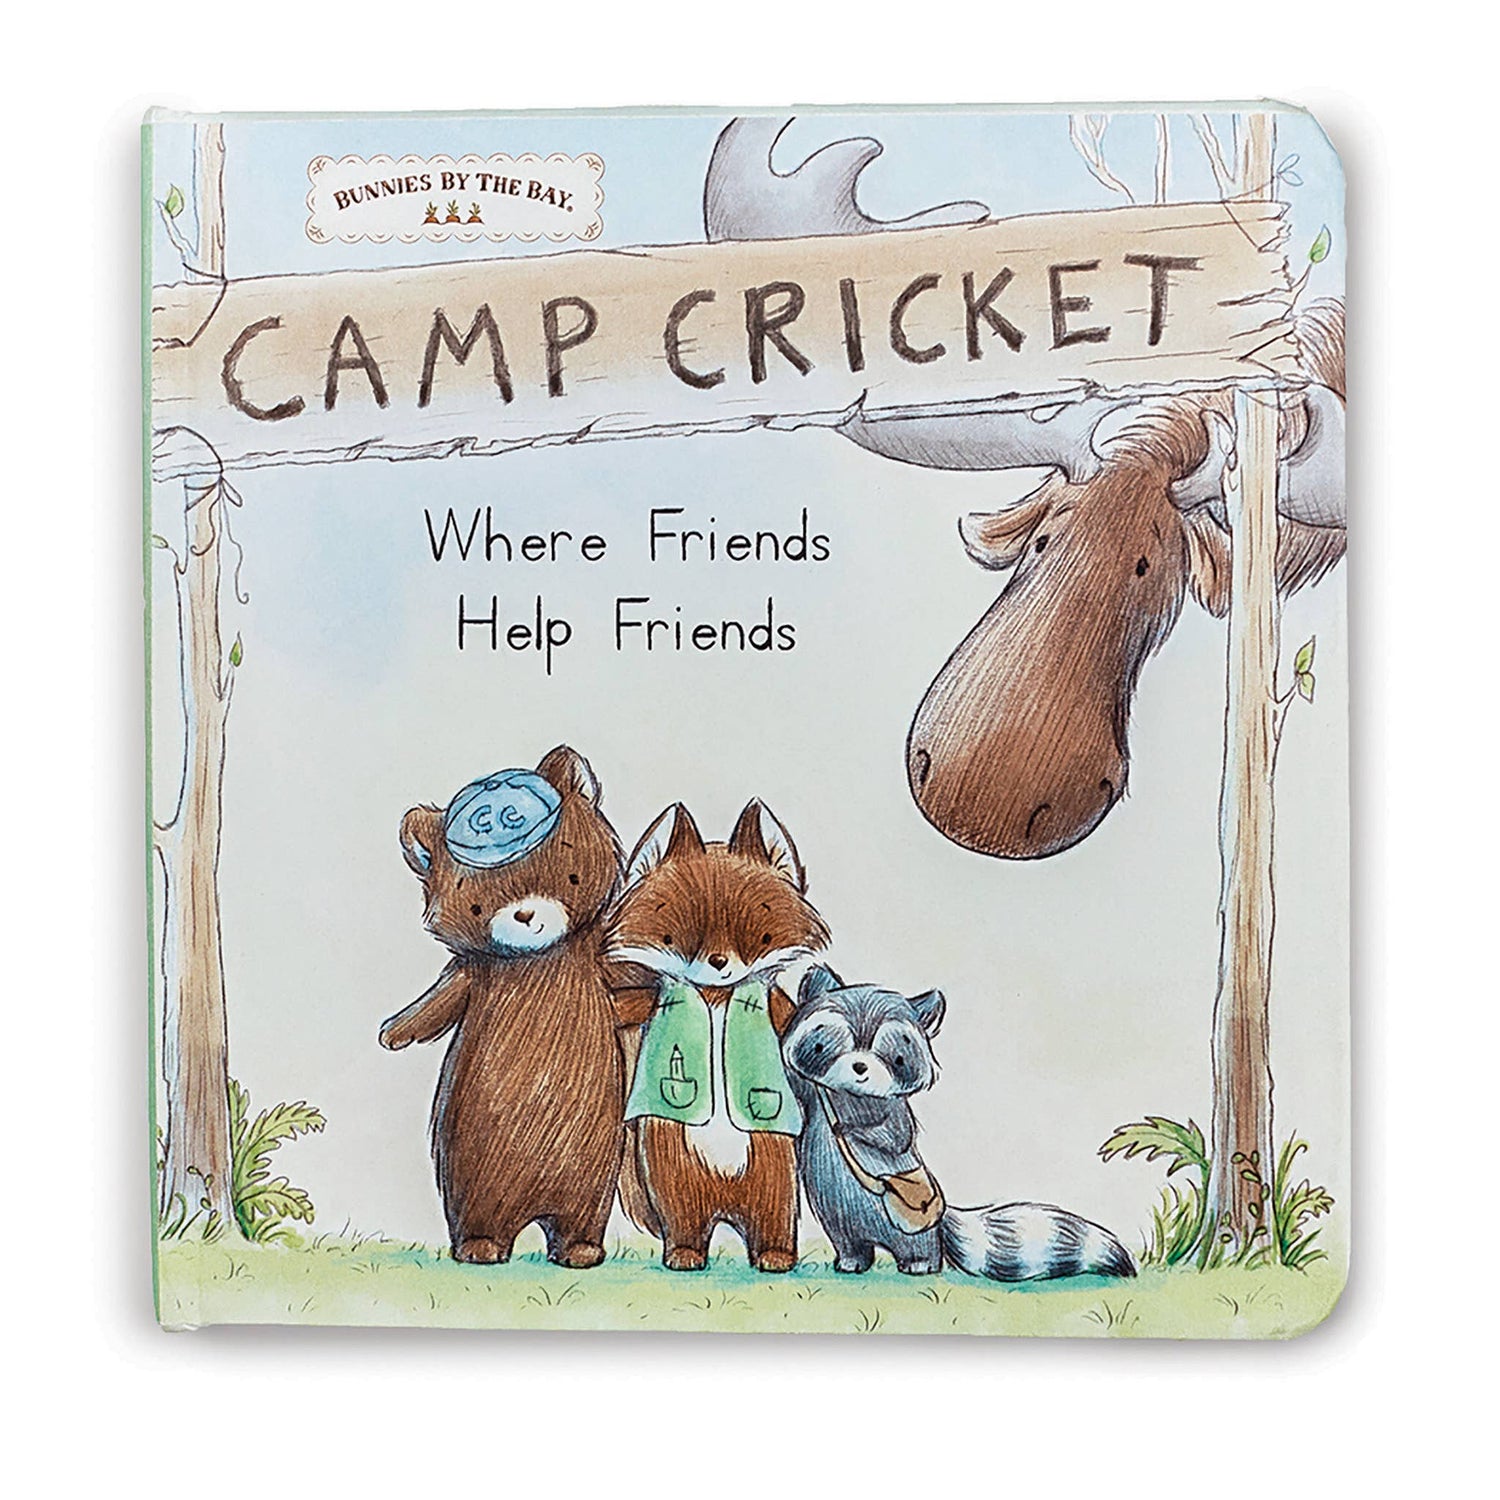 Camp Cricket Board book, Where Friends Help Friends, by Bunnies by the Bay